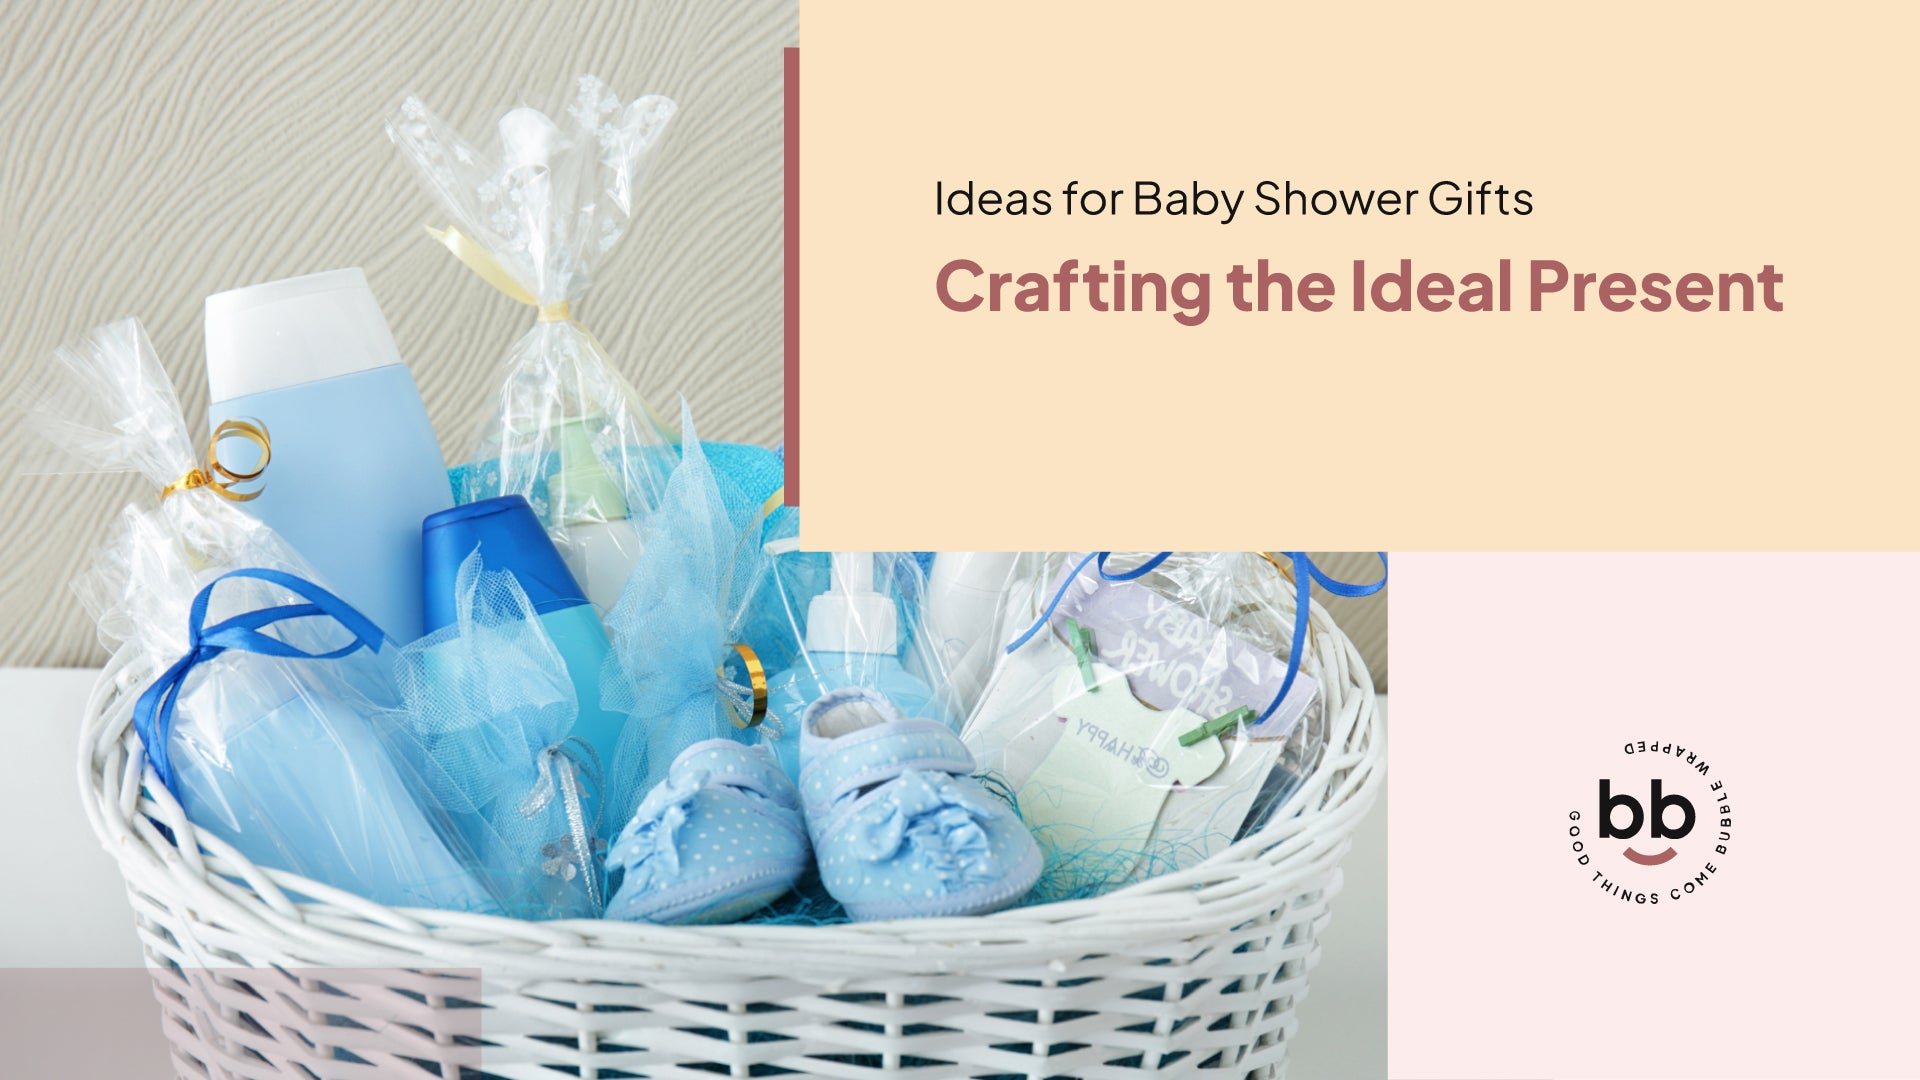 Ideas for Baby Shower Gifts: Crafting the Ideal Present